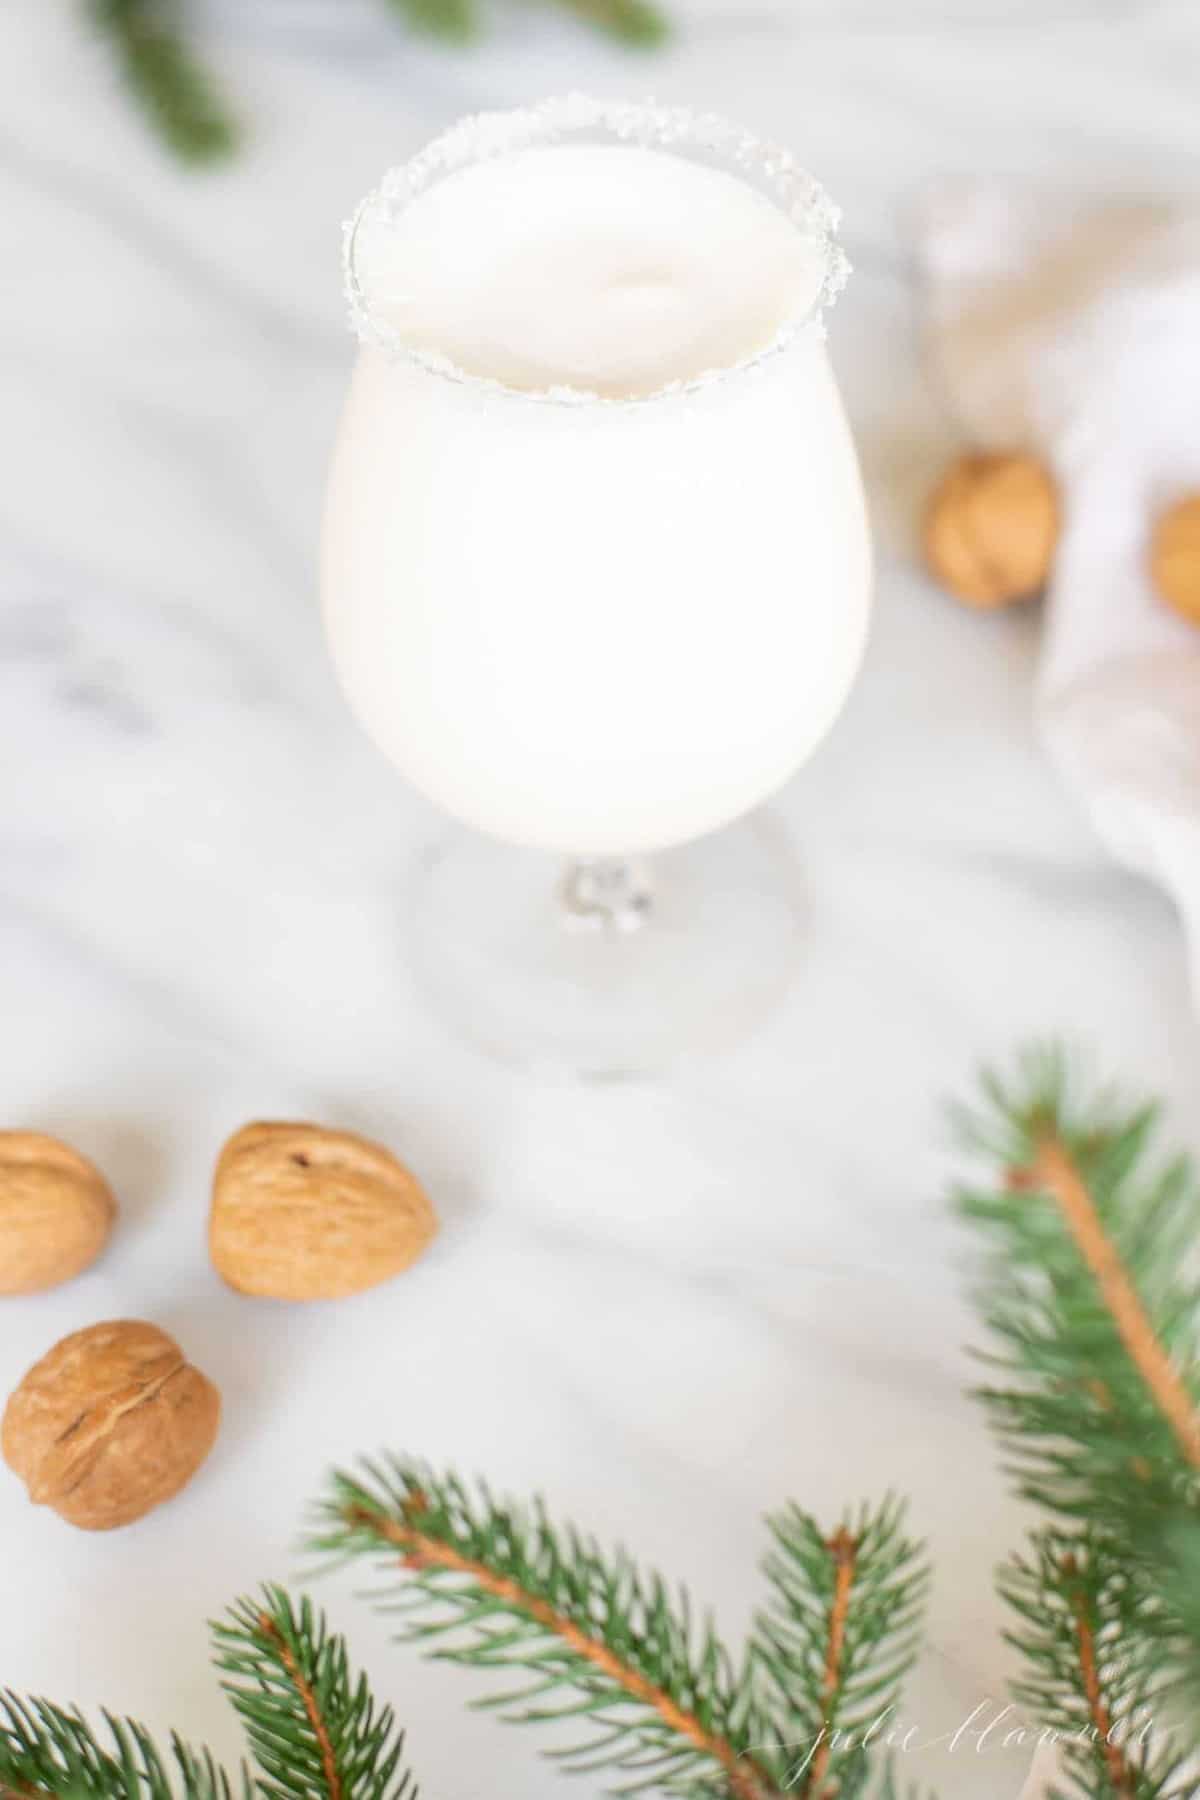 Marble surface with a clear glass filled with a snowball drink, rimmed in sugar, with chestnuts and evergreen touches around.